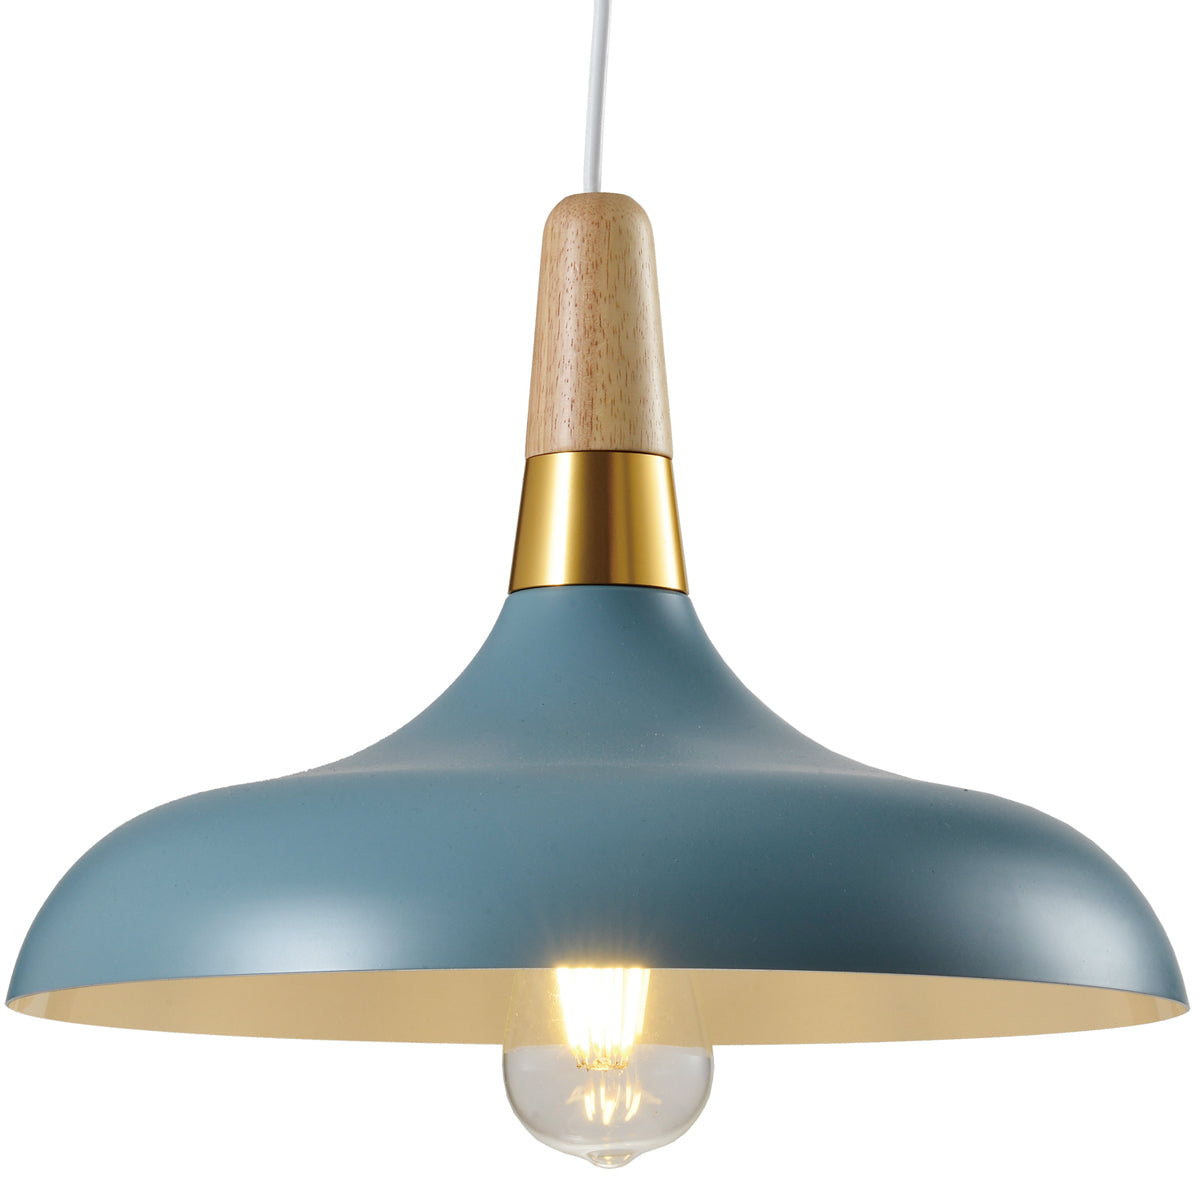 The Esther Pendant is a stylish modern metal ceiling light finished in Marine blue with a white inner.  Complete with a gold and wooden cap detail attached to a white adjustable cable and m